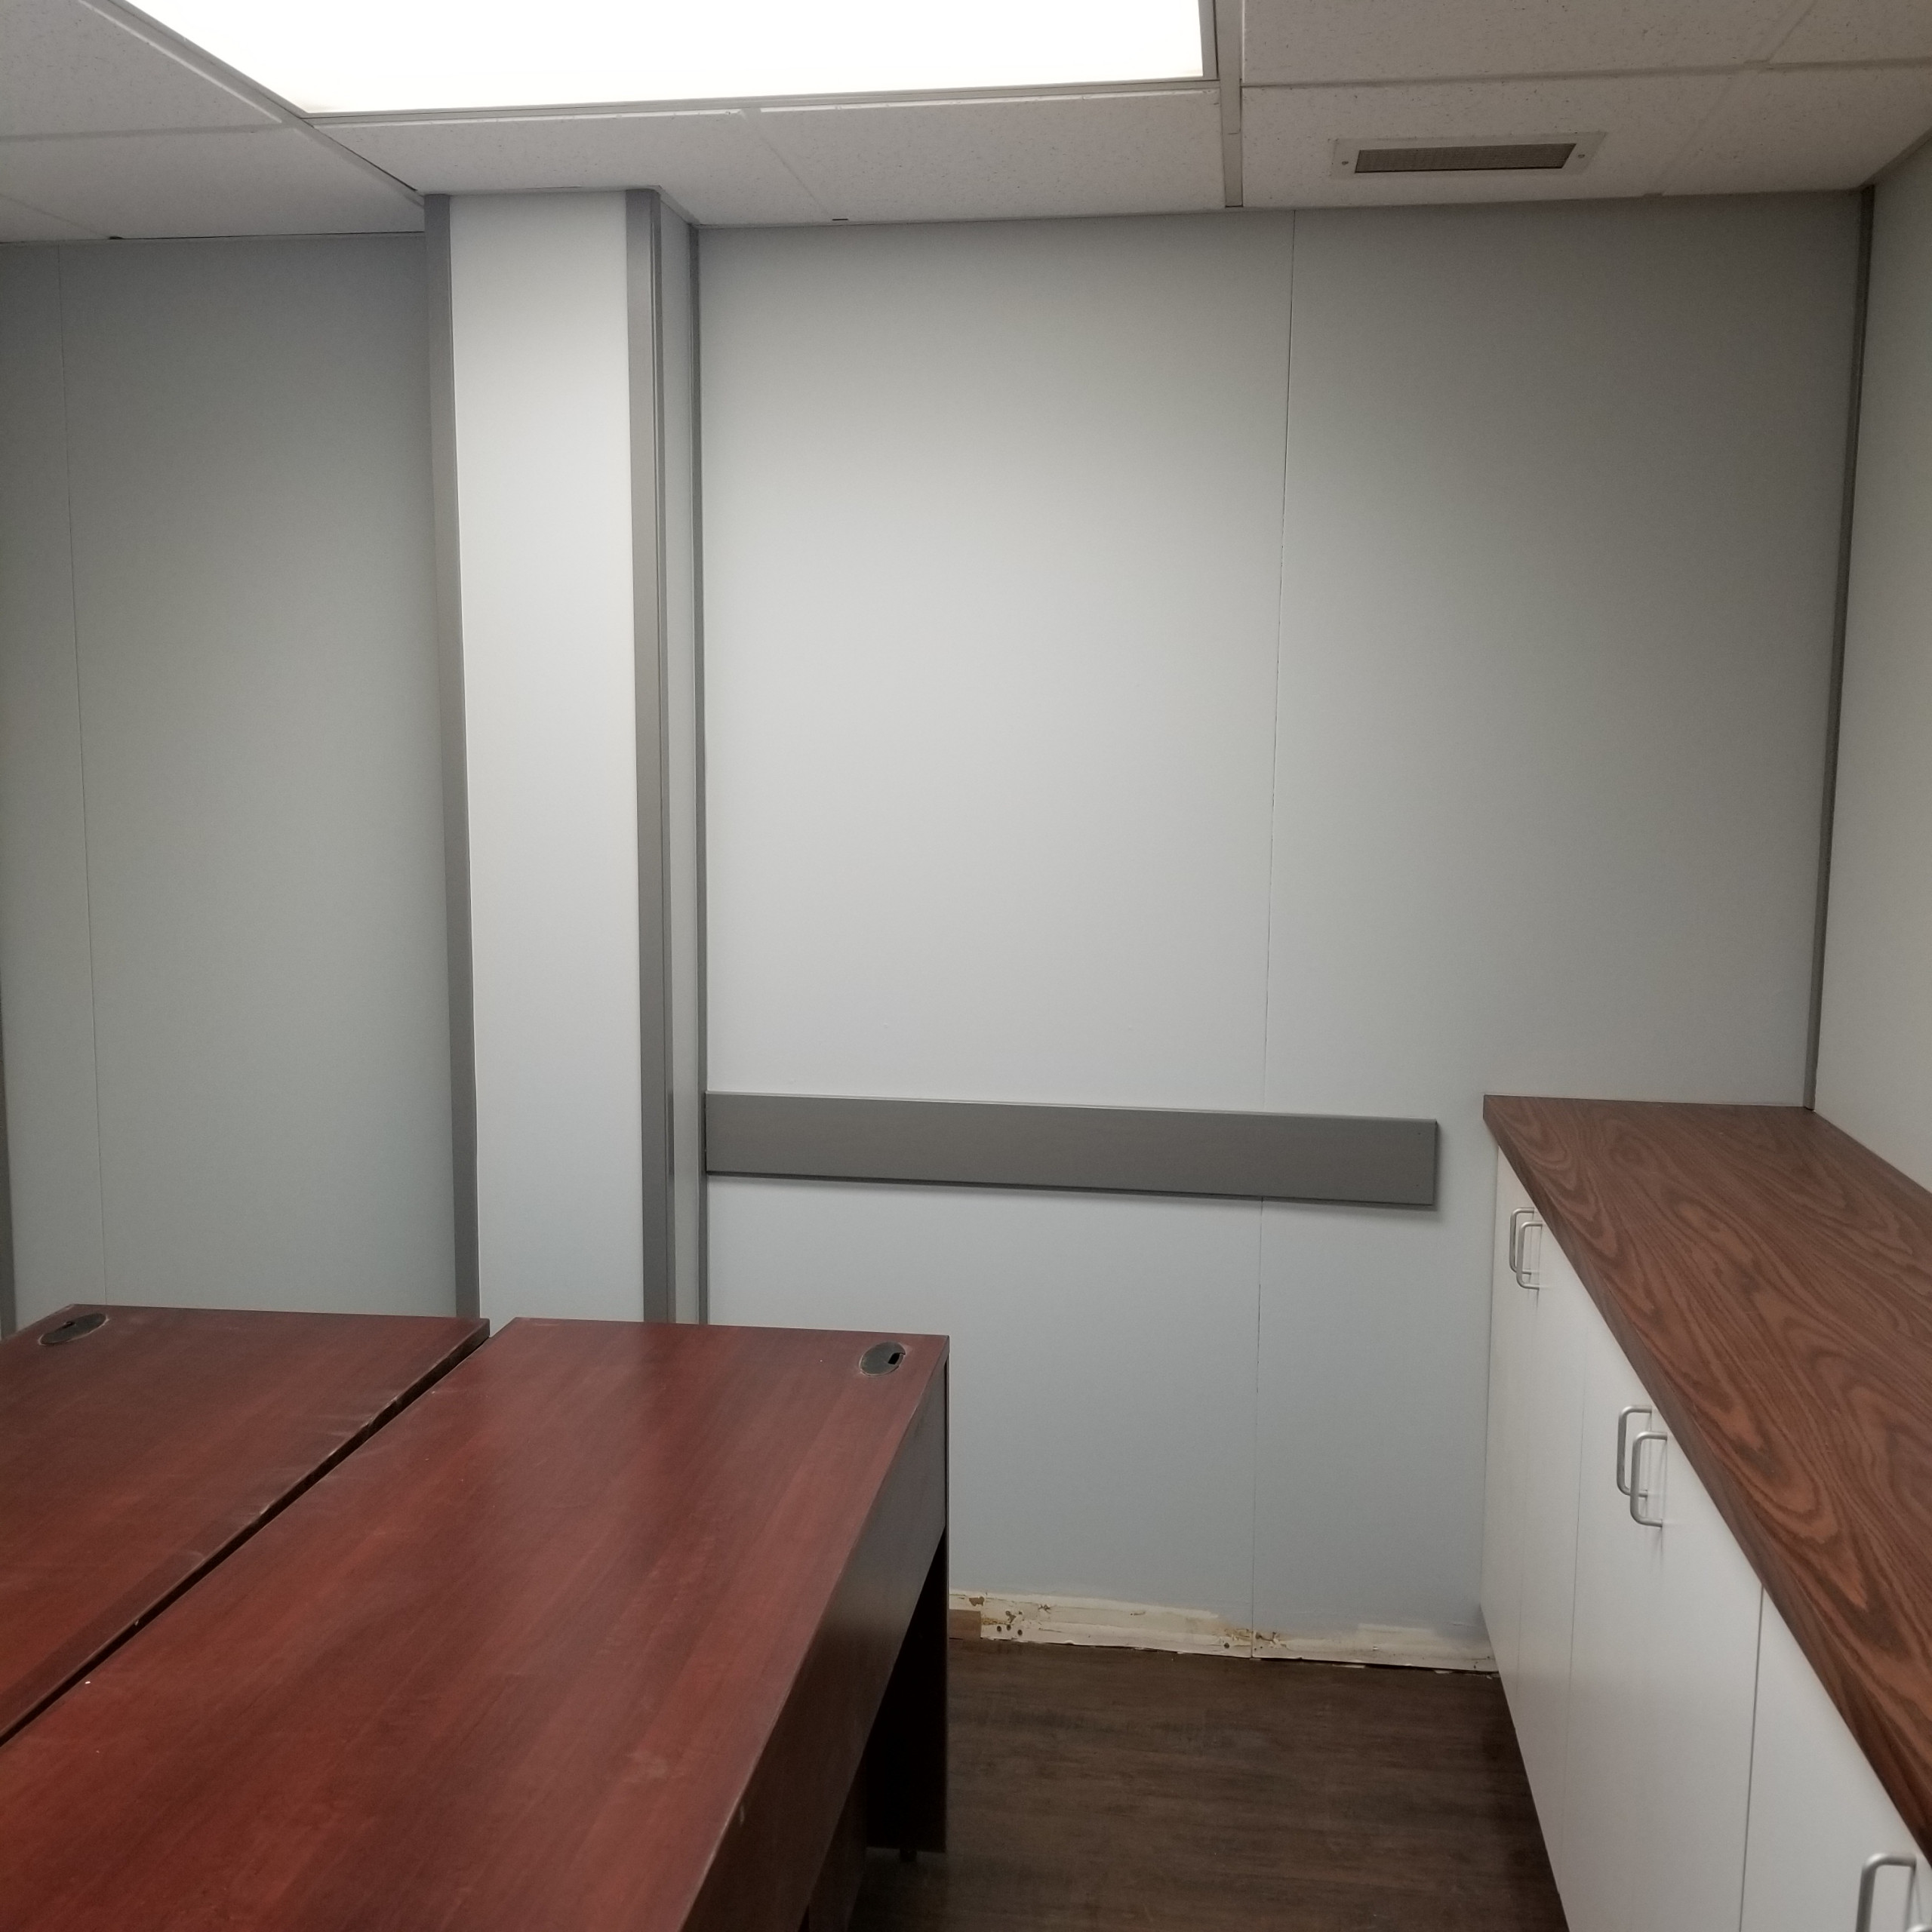 Commercial Office Reno